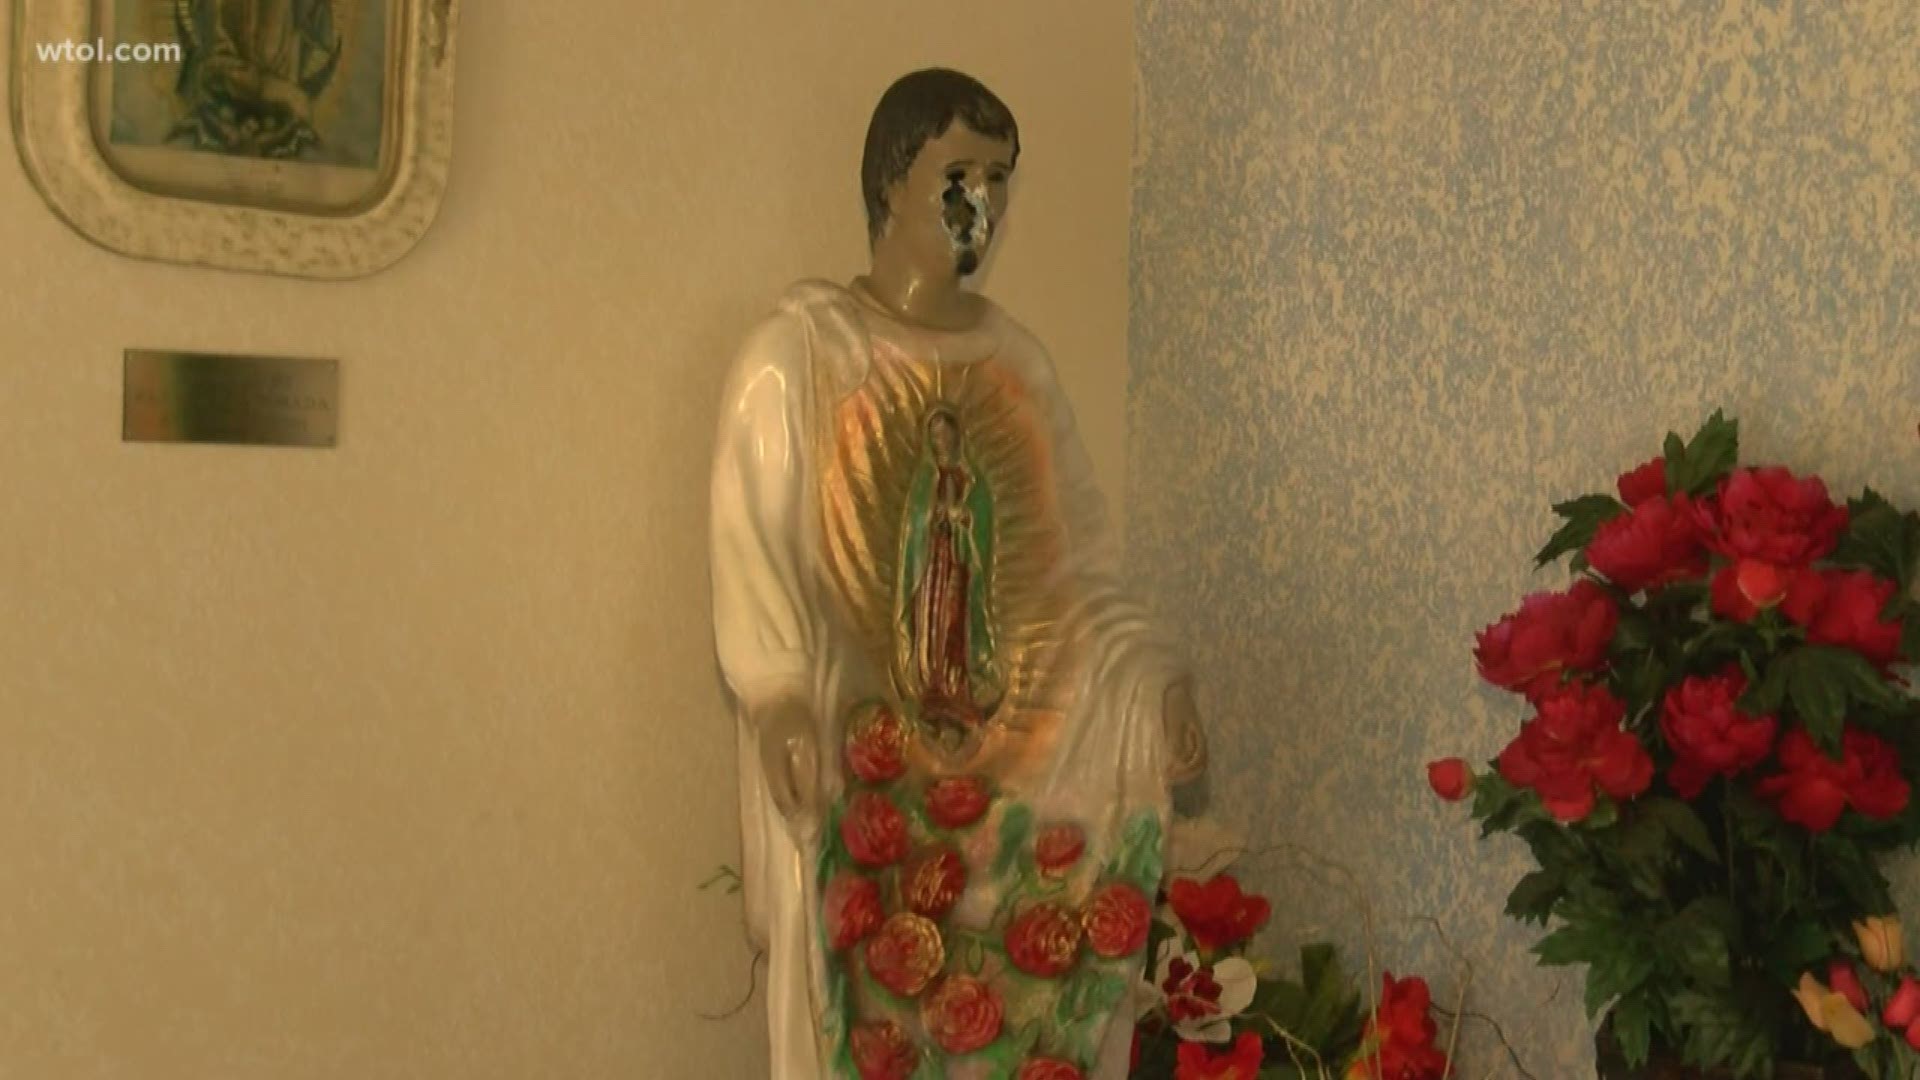 Two statues were defaced. Another statue was decapitated.